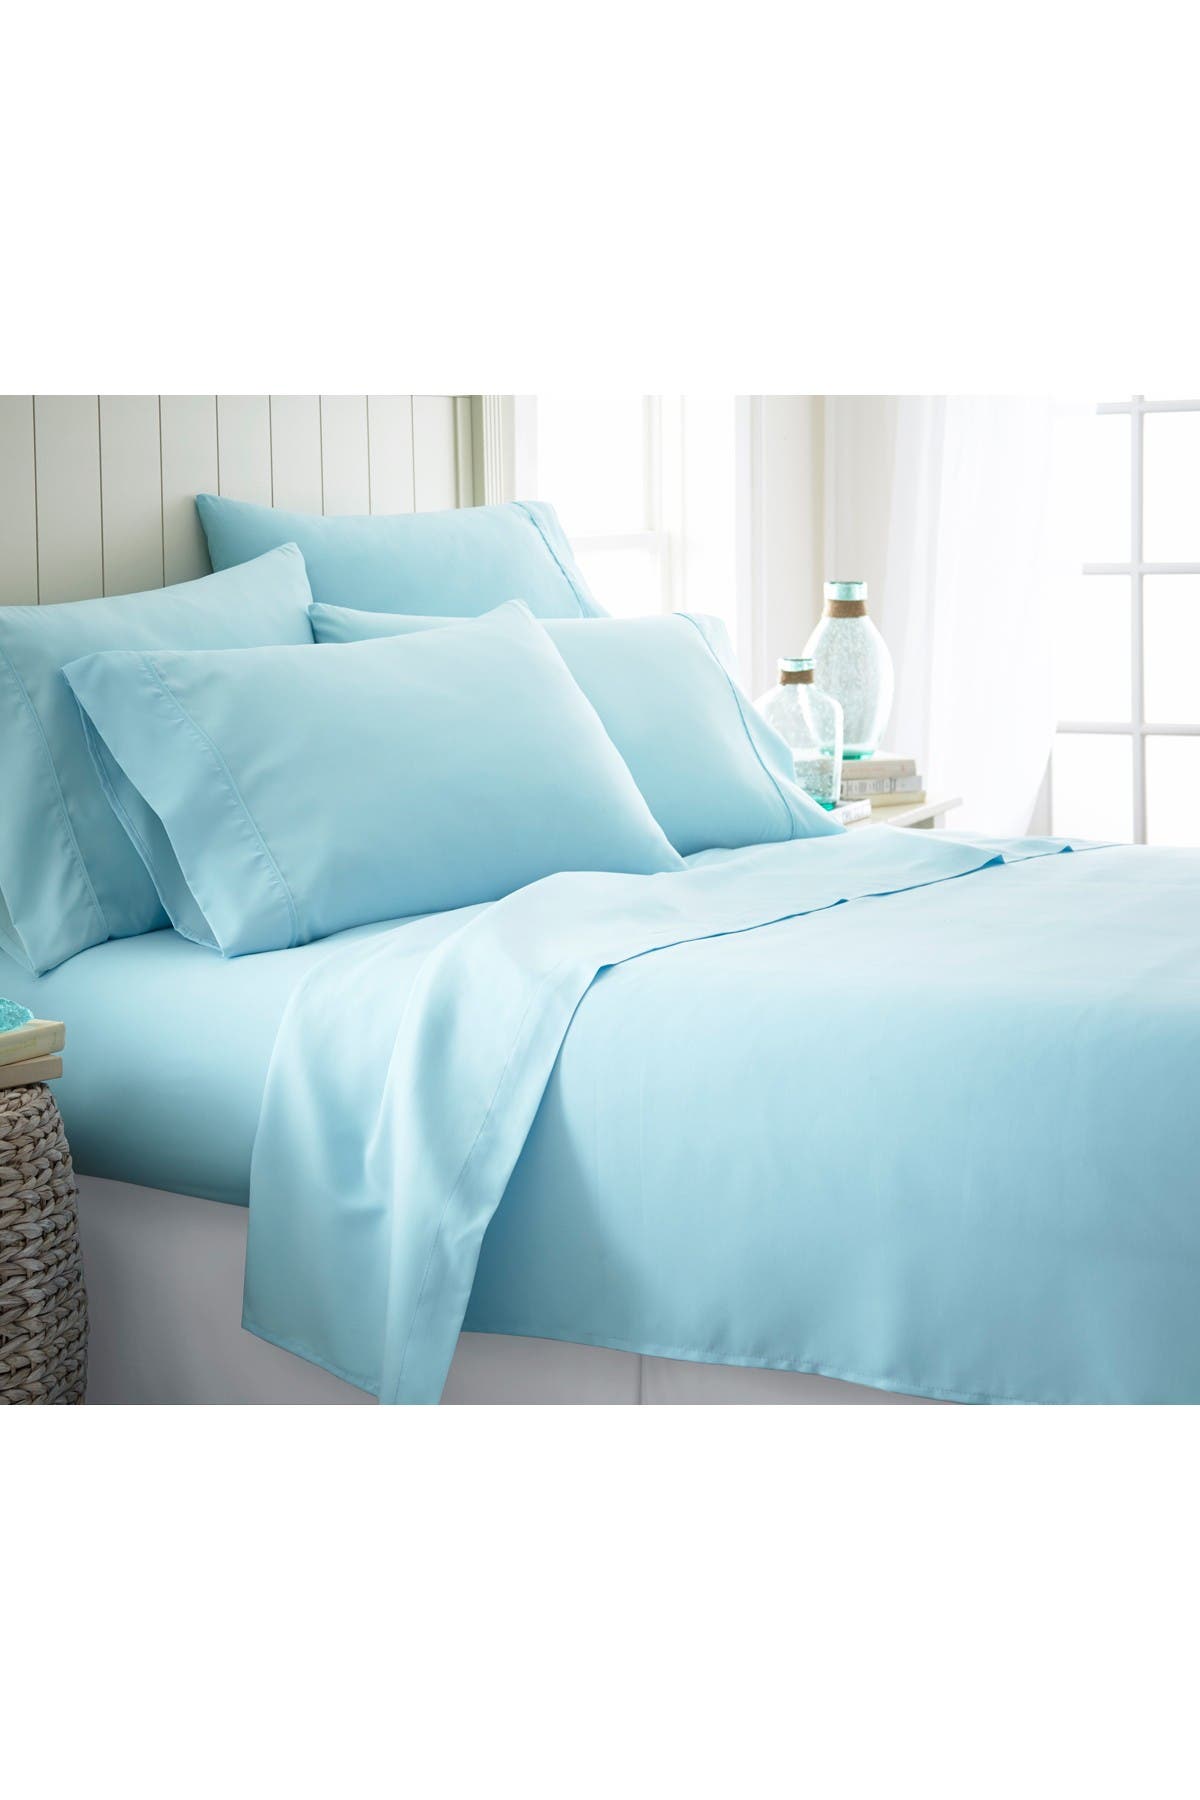 Ienjoy Home King Hotel Collection Premium Ultra Soft 6-piece Bed Sheet Set In Blue